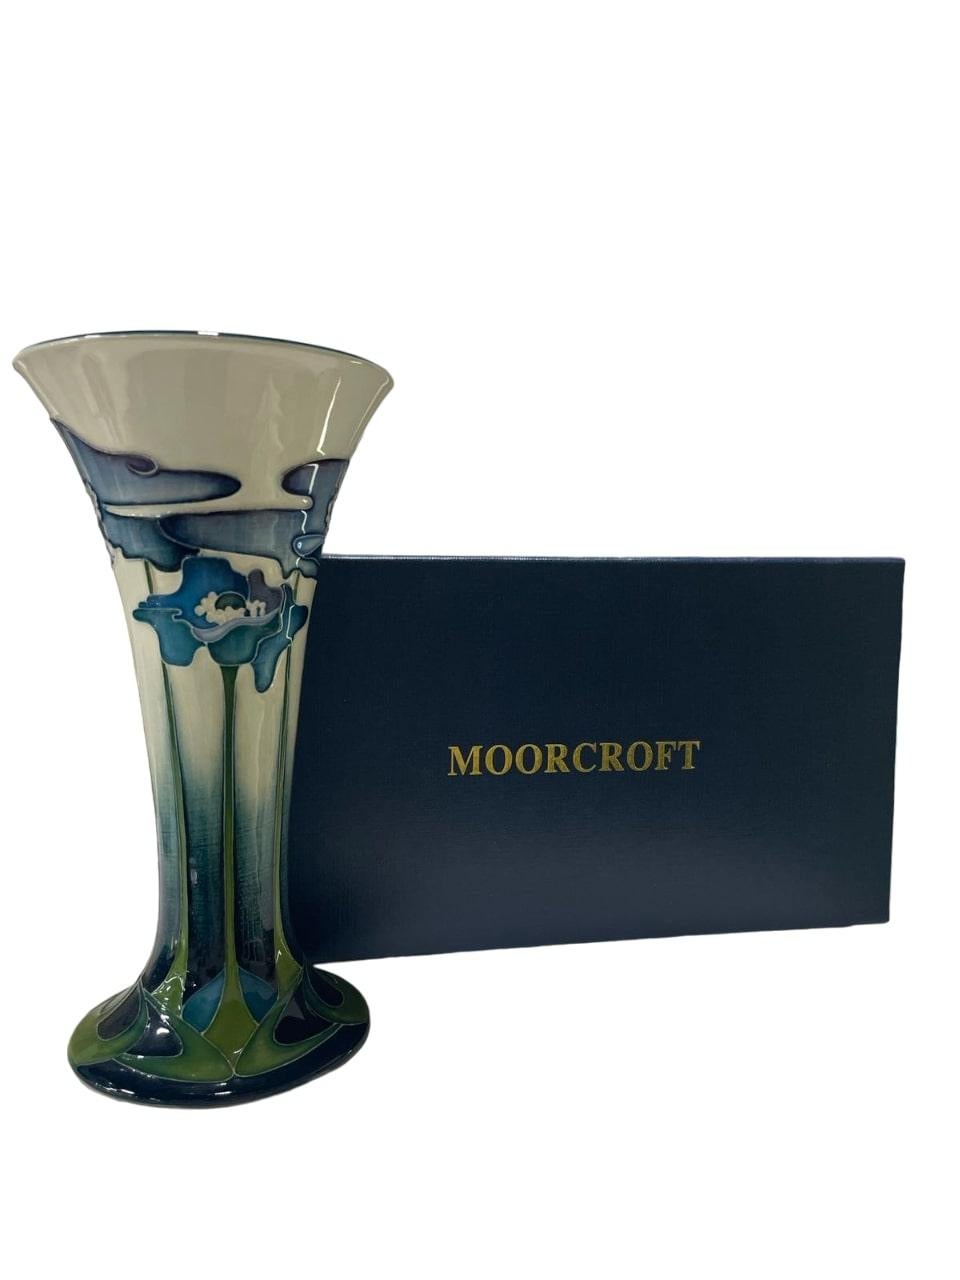 MOORCROFT Blue Heaven TRIAL vase,  by Nicola Slaney dated 4.11.09 BOXED For Sale 1